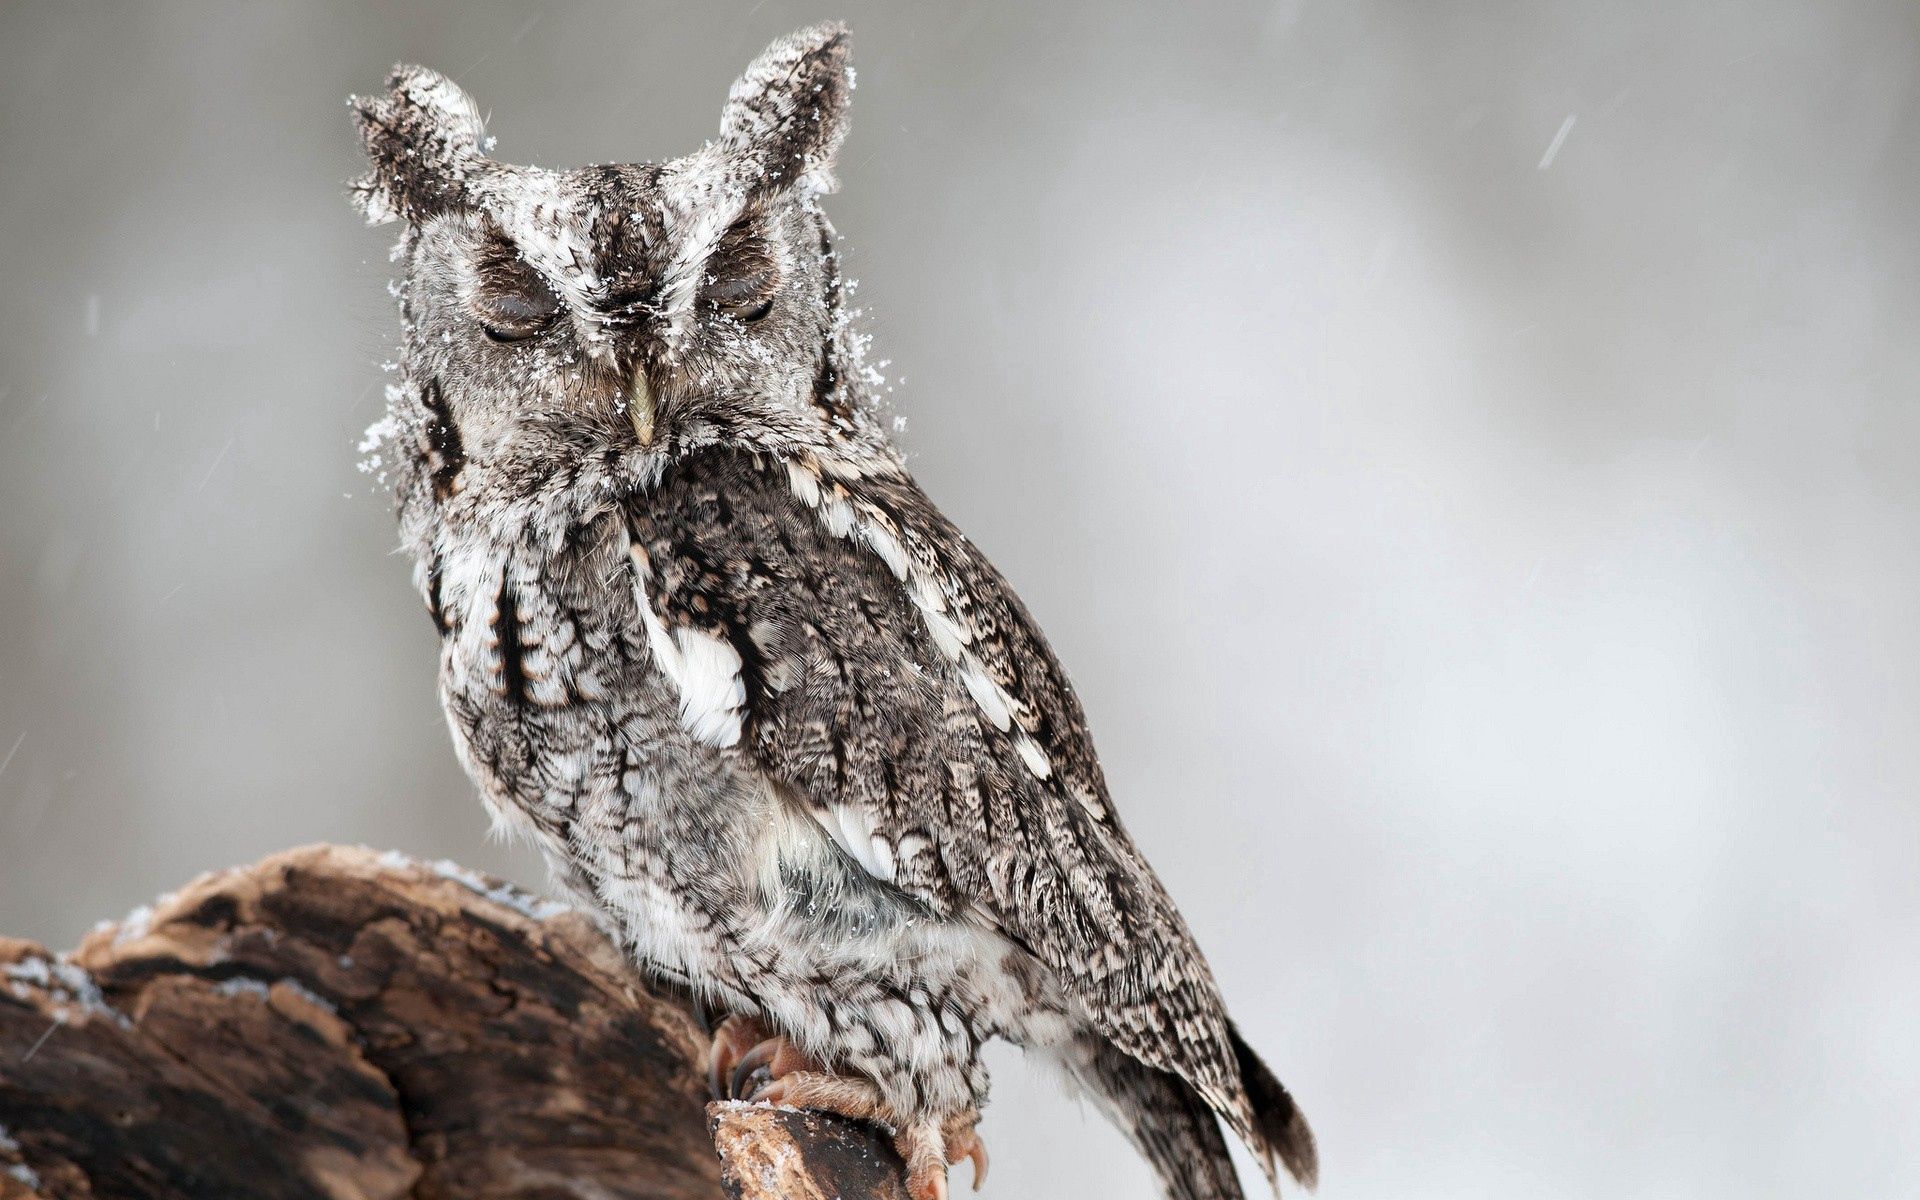 64638 download wallpaper animals, owl, bird, predator, sight, opinion, sleep, dream screensavers and pictures for free